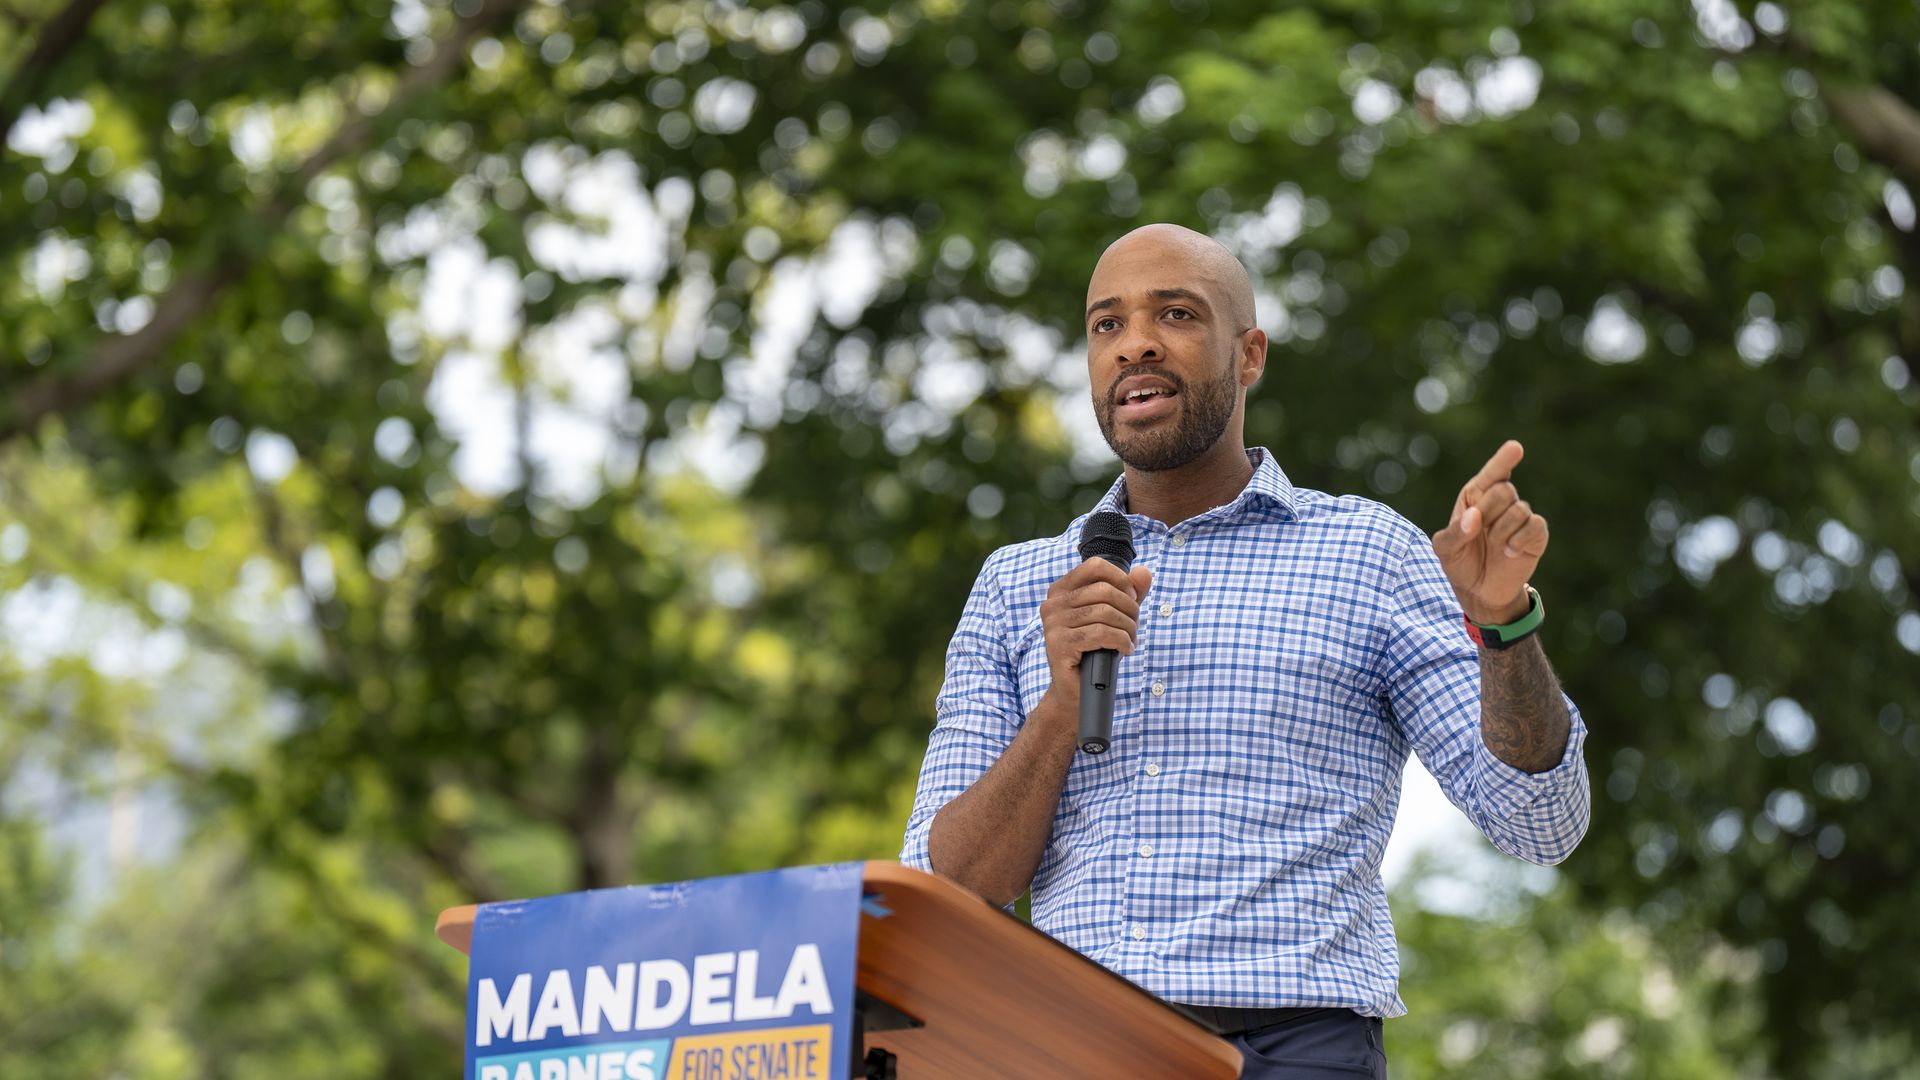 Wisconsin's former Lt. Gov. Mandela Barnes speaking to supporters outside holding a microphone in his right hand.